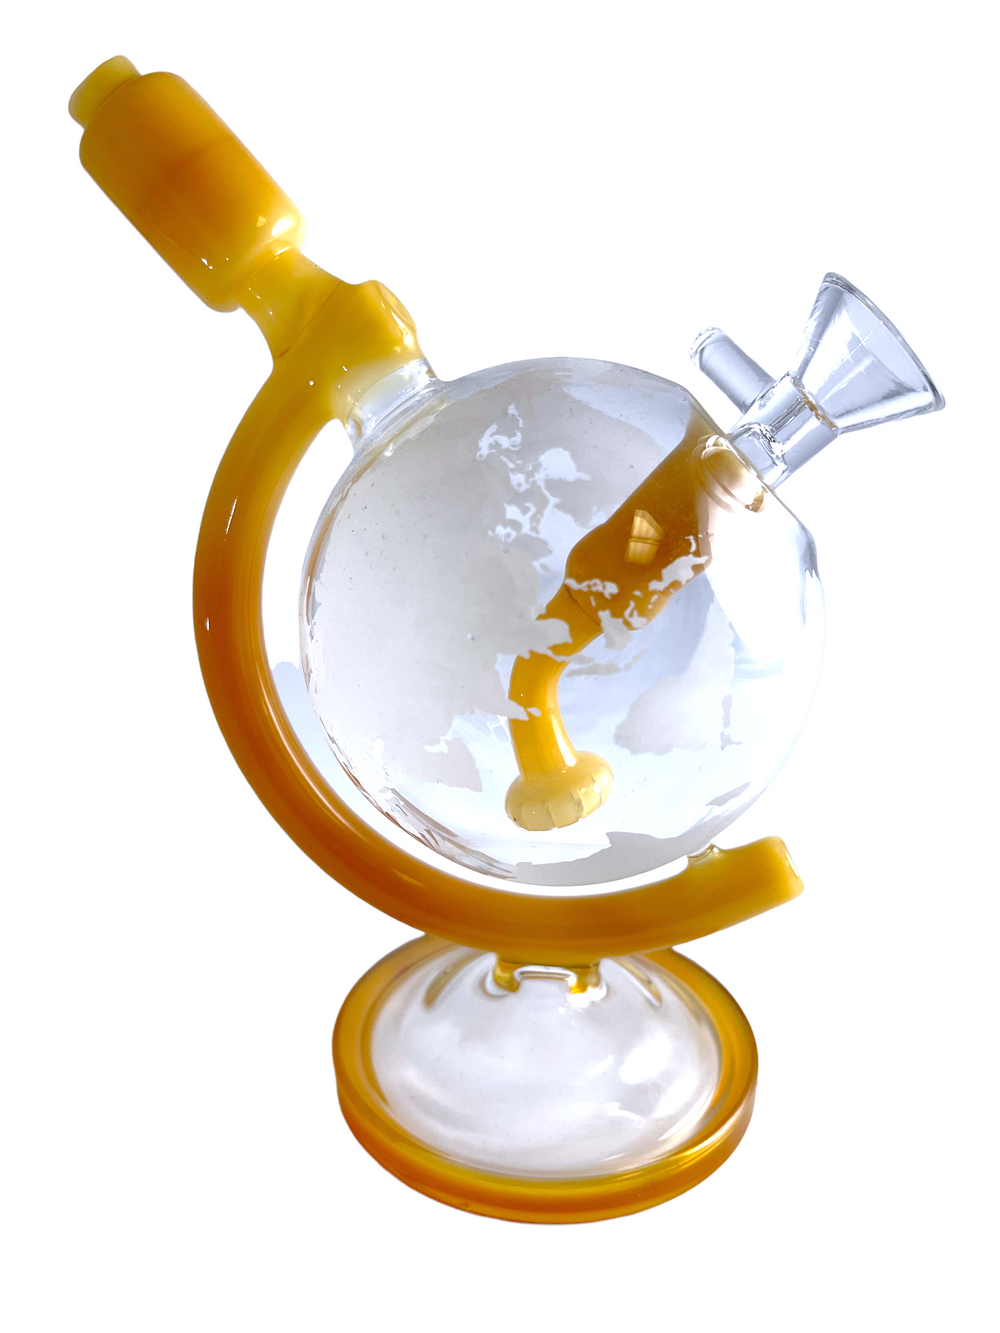 7" Glass World Globe Oil Rig Water Pipe